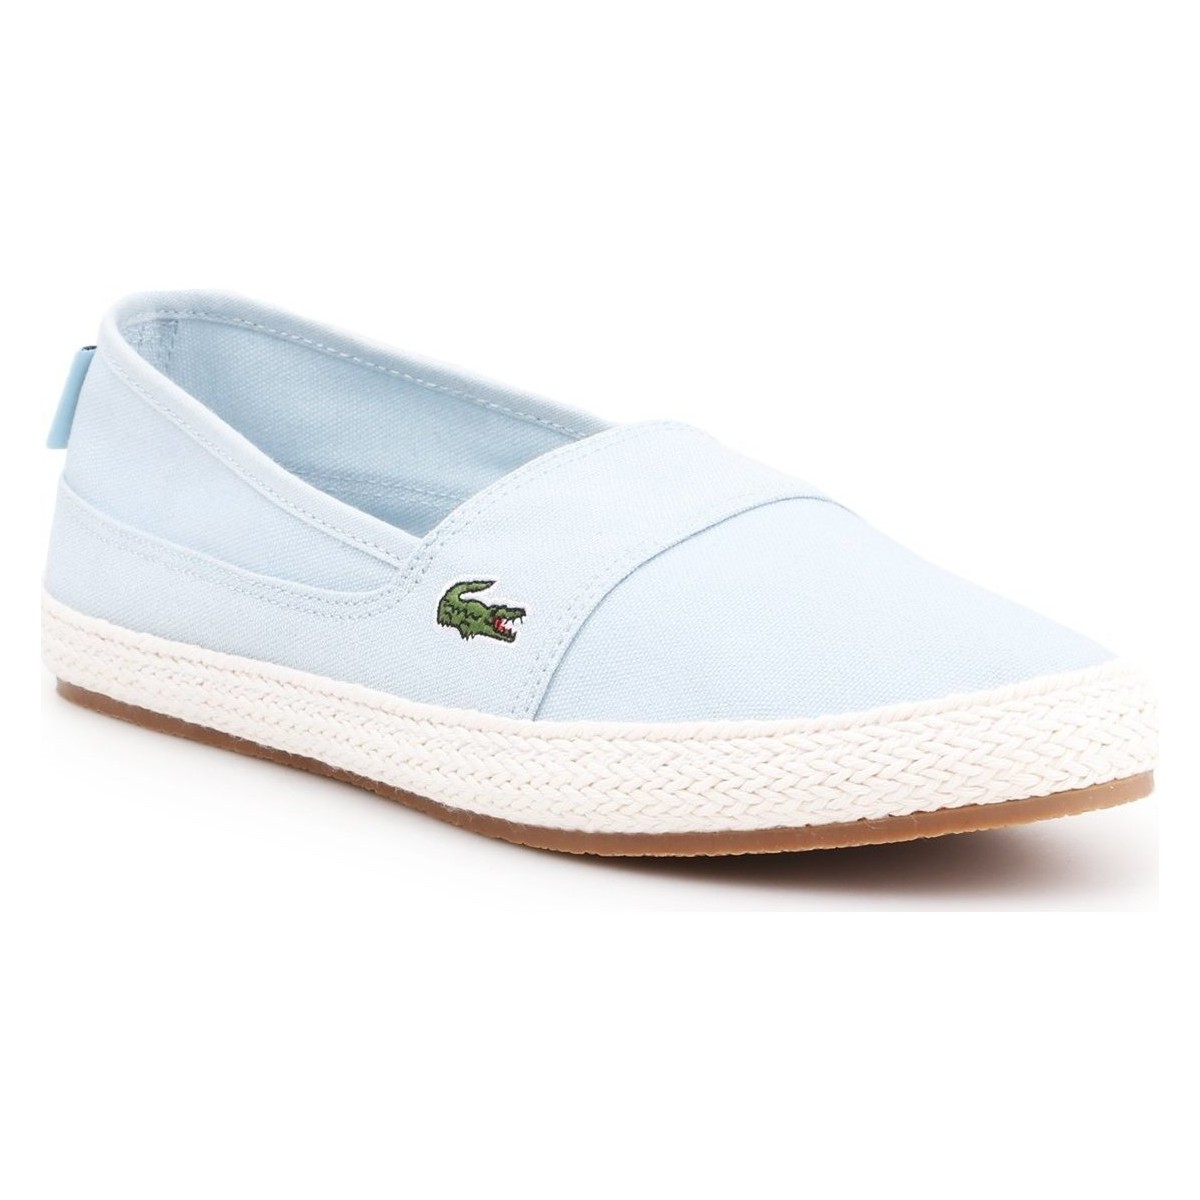 Shoes Women Low top trainers Lacoste Lifestyle shoes  Marice 218 1 CAW 7-35CAW004252C Blue